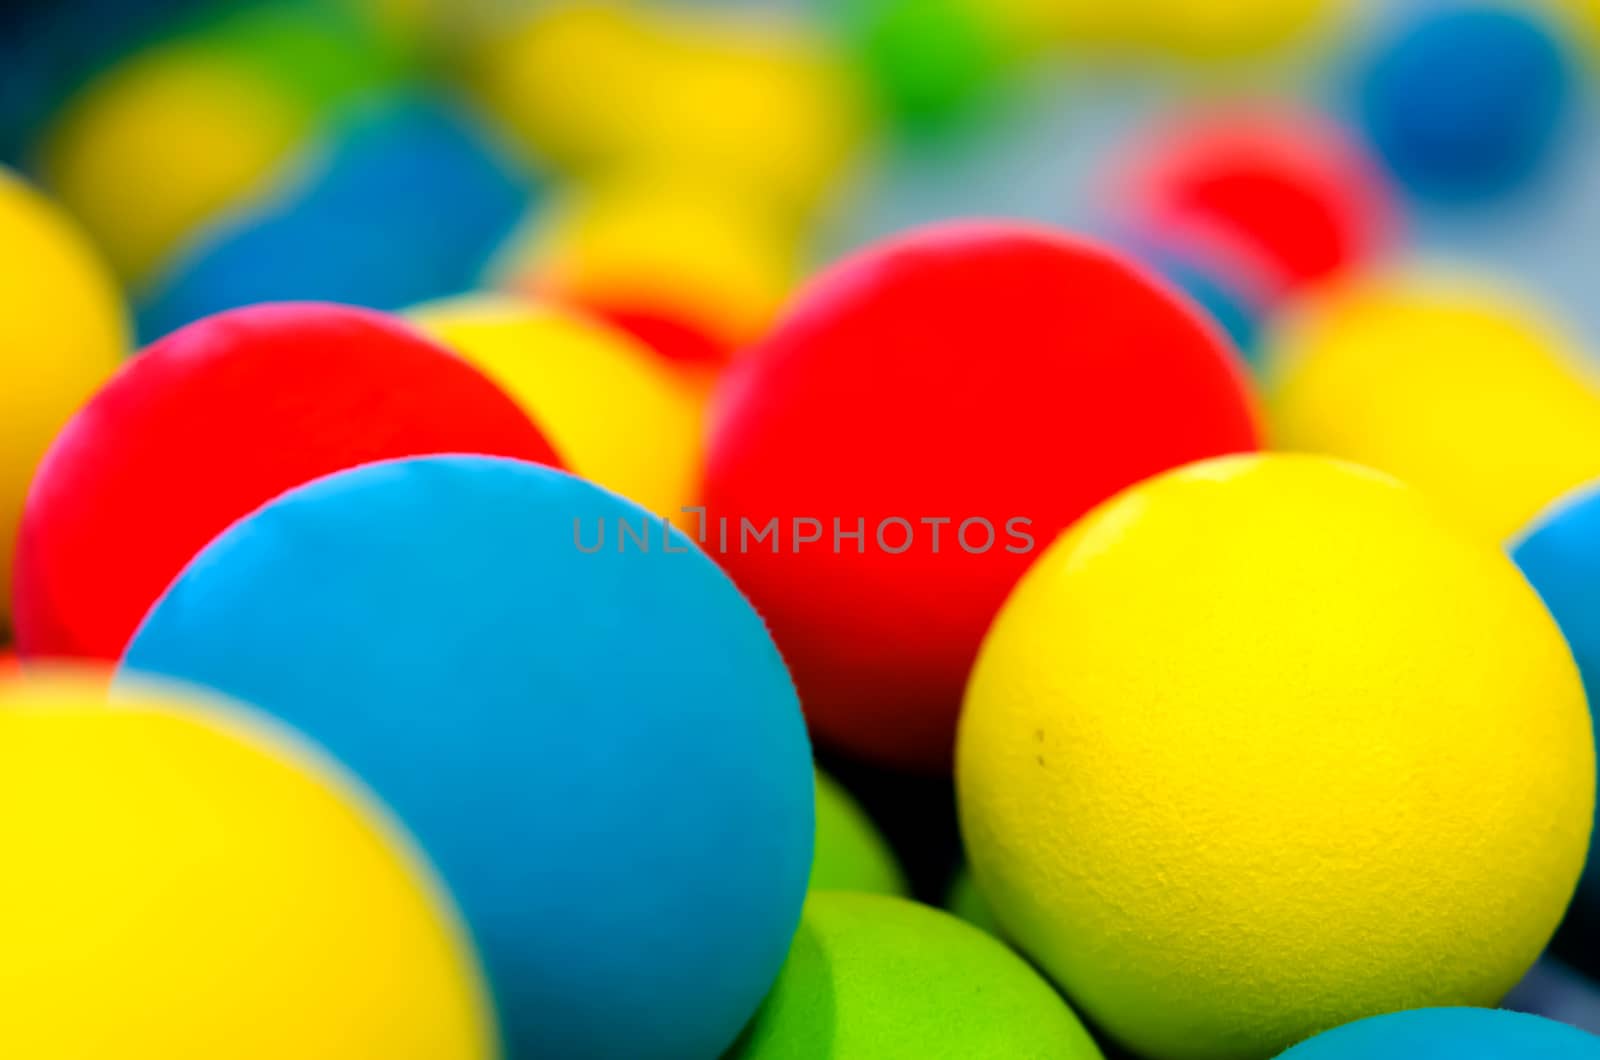 Many colors the ball, toys put together.